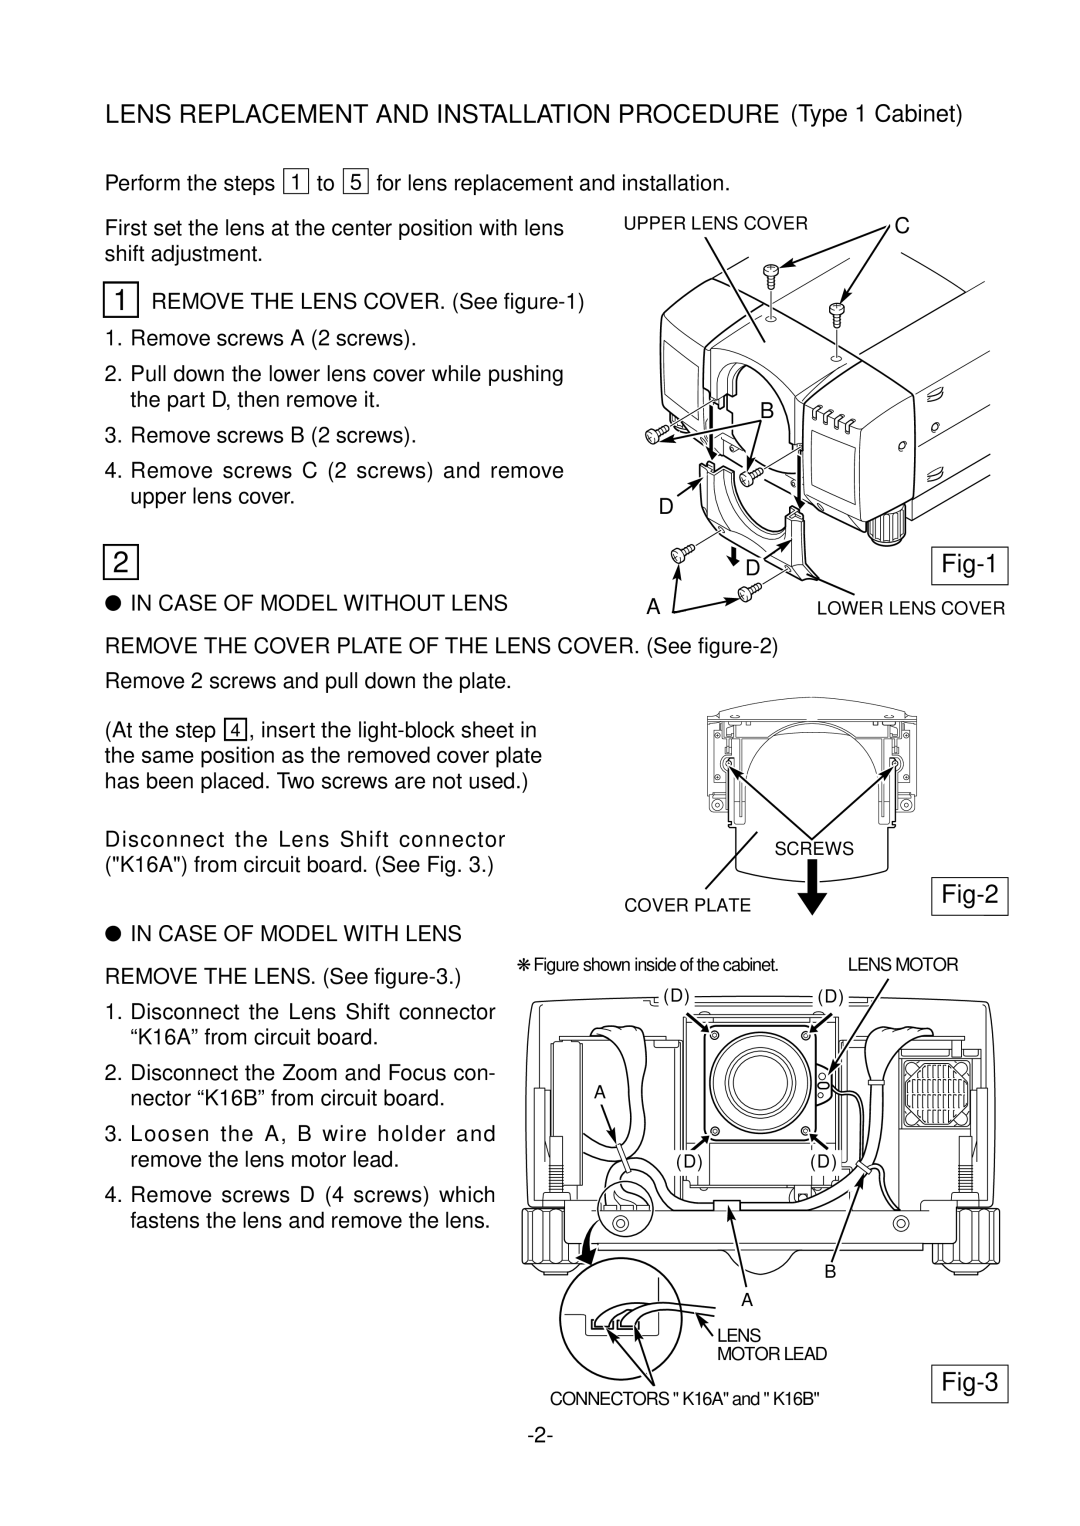 Fisher LNS-W03 manual LENS REPLACEMENT AND INSTALLATION PROCEDURE Type 1 Cabinet, Fig-1, Fig-2, Fig-3 